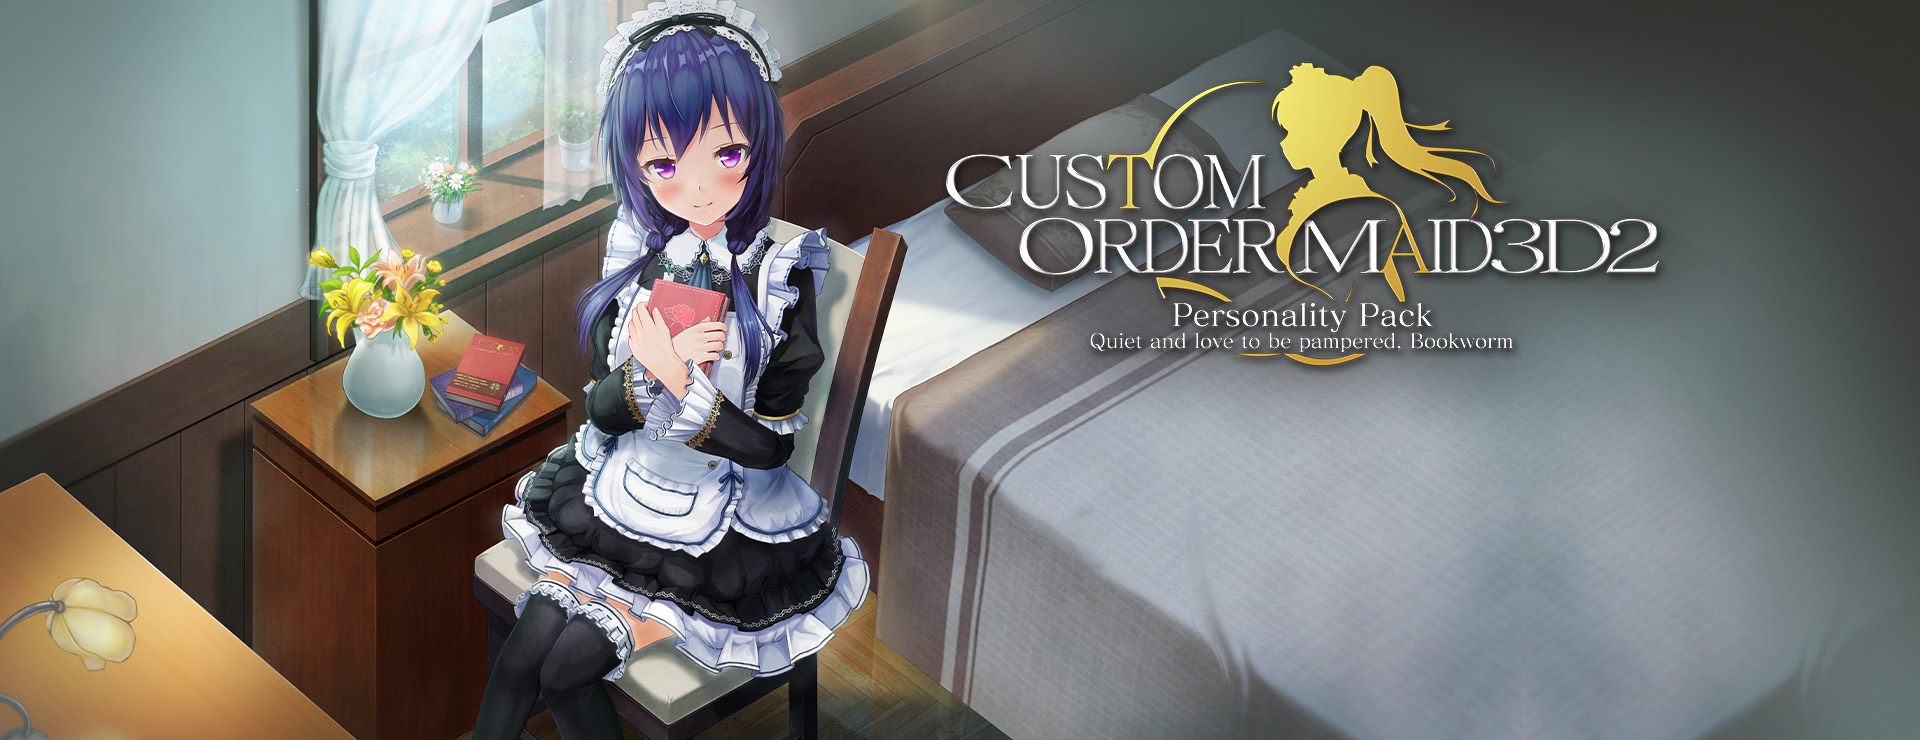 Custom Order Maid 3D2 - Quiet and Love to be Pampered Bookworm DLC - Symulacja Gra